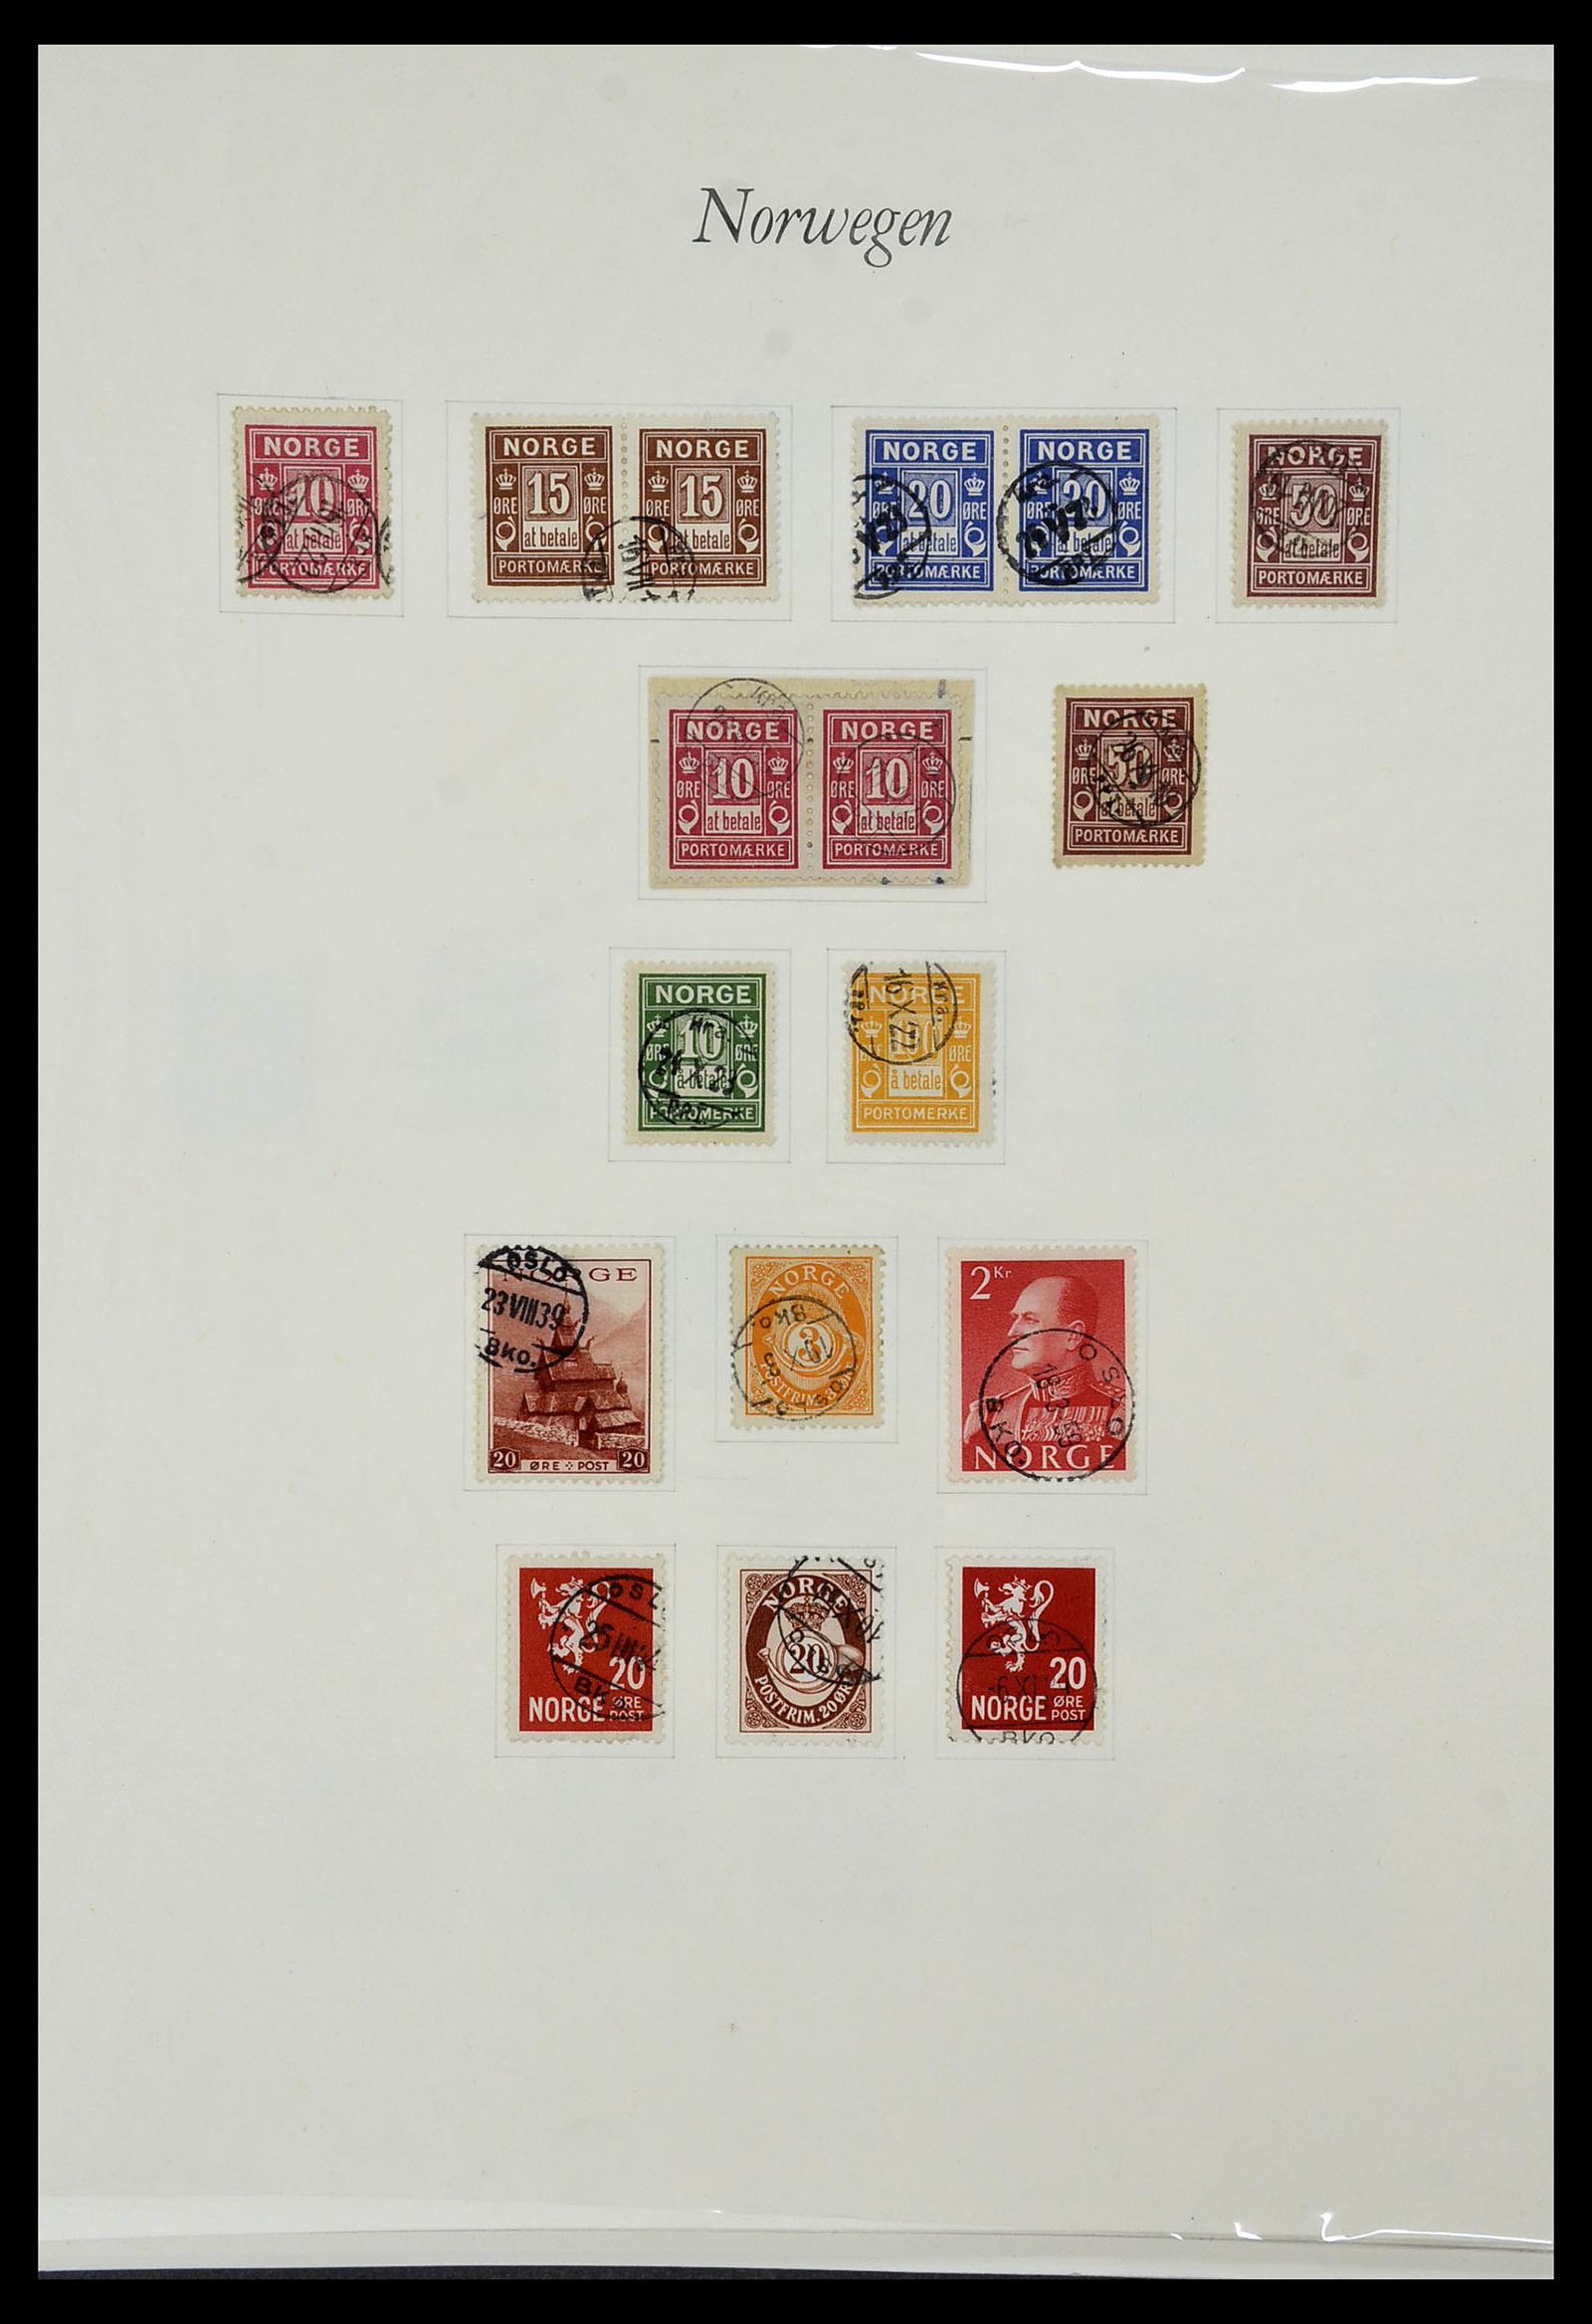 34154 040 - Stamp collection 34154 Norway postage dues 1883-1973.